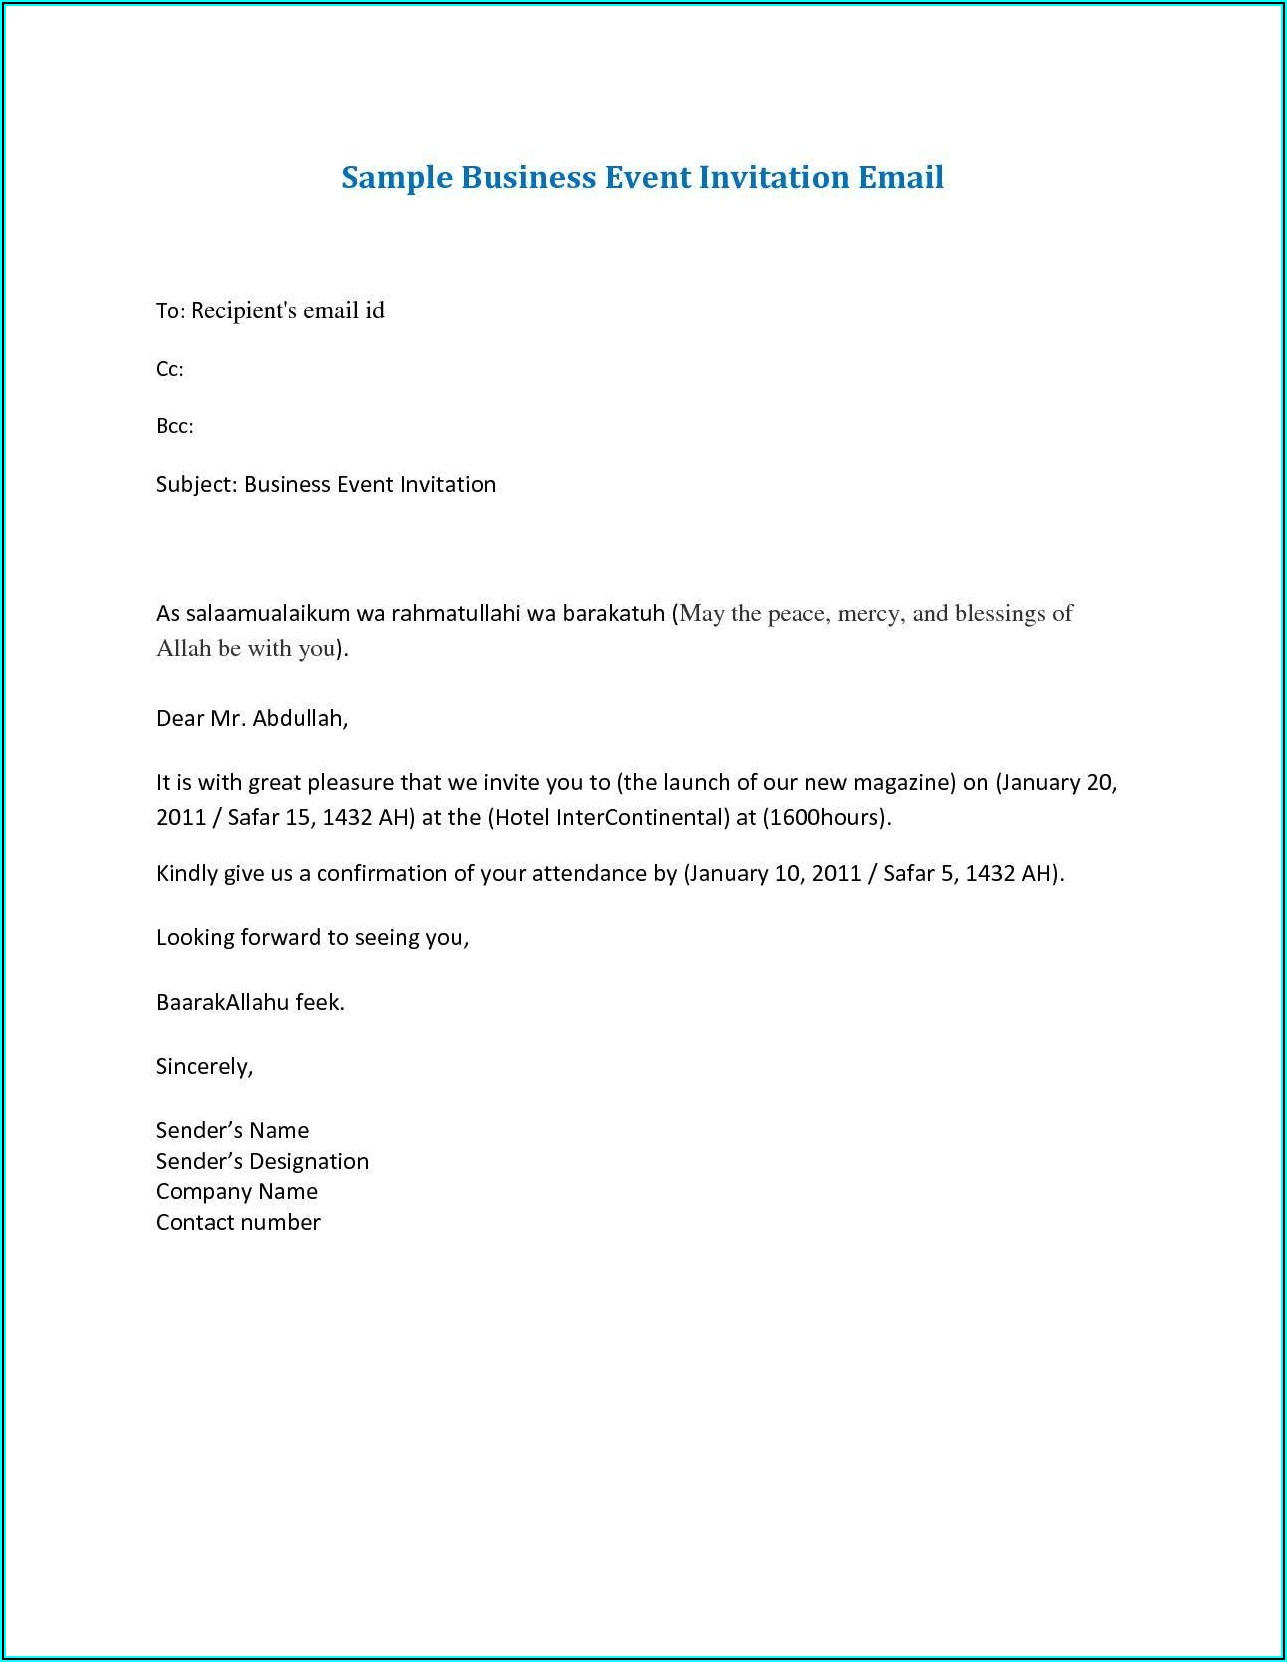 Annual Dinner Invitation Email To Staff